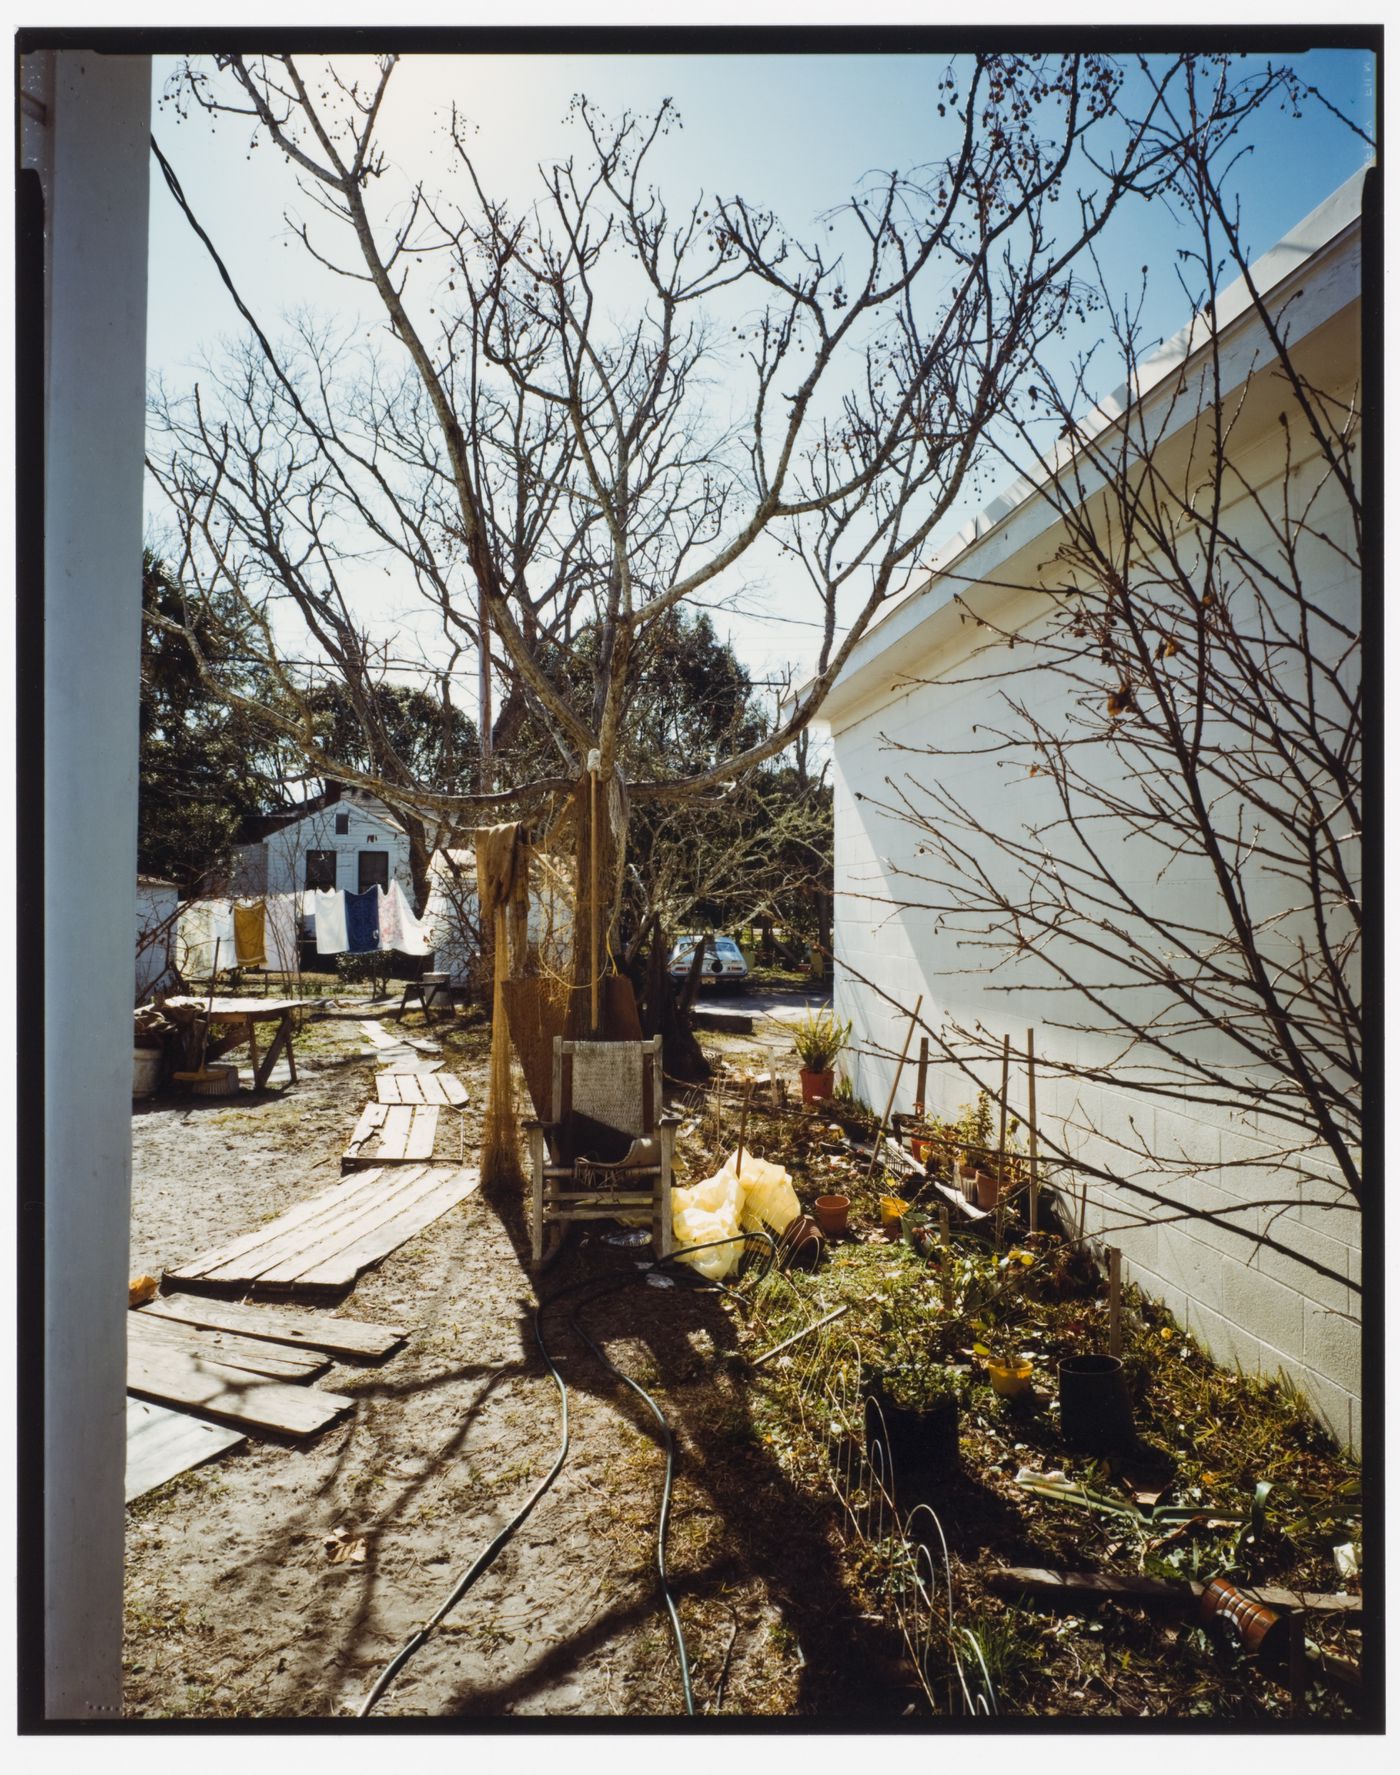 View of urban landscape with a tree with a chair in front of it next to the side of a building, off of U.S. 98, Apalachacola, Florida